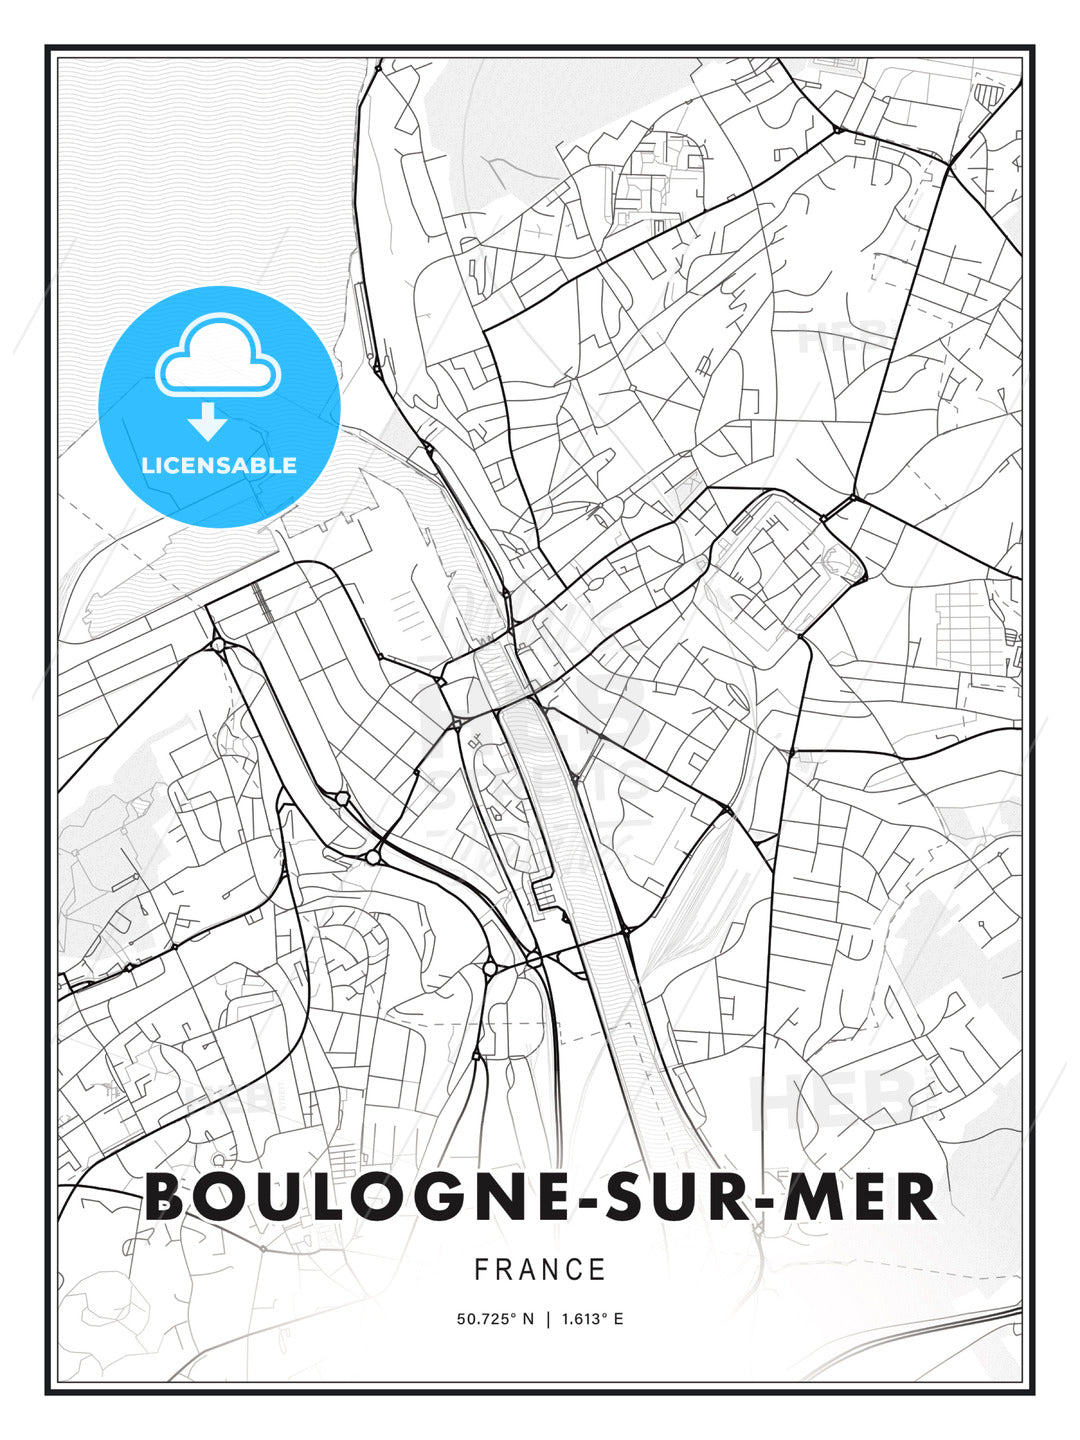 Boulogne-sur-Mer, France, Modern Print Template in Various Formats - HEBSTREITS Sketches